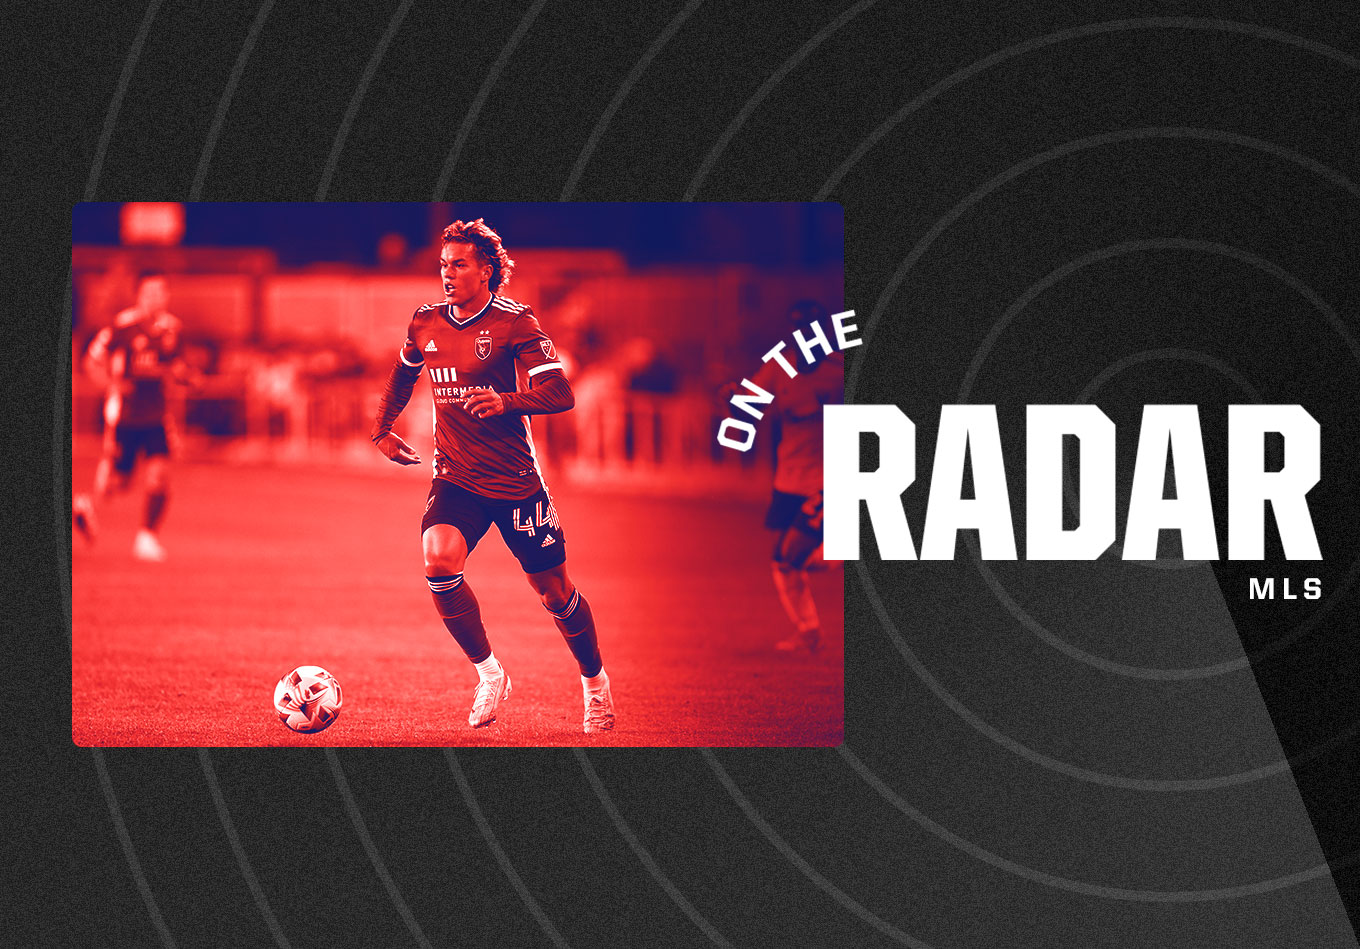 On the Radar: Major League Soccer’s Top Young Players